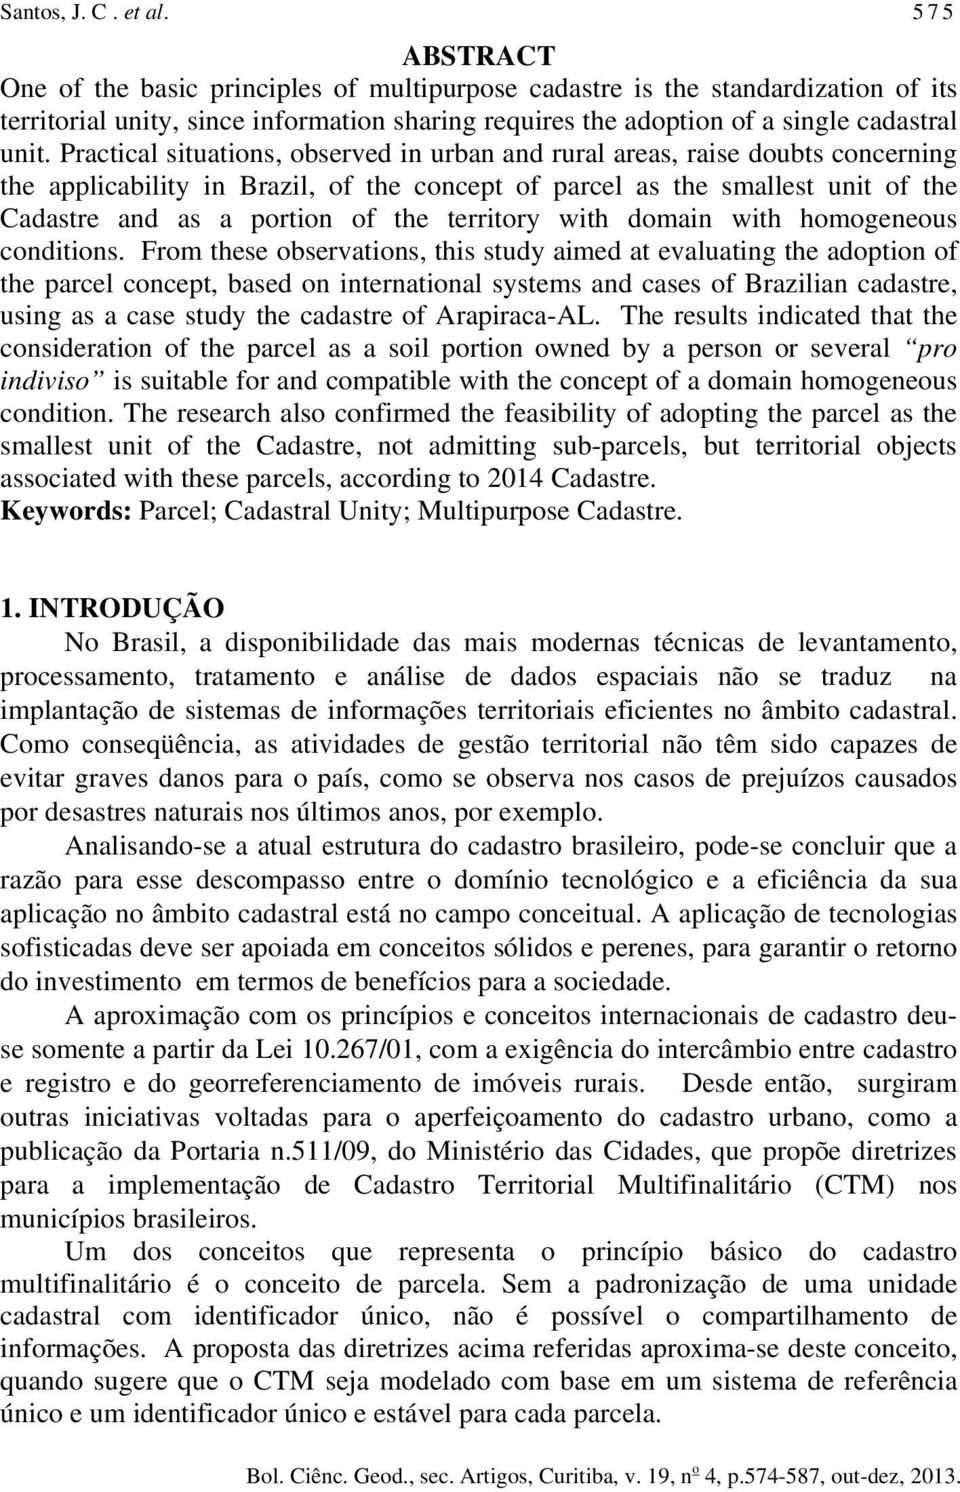 Practical situations, observed in urban and rural areas, raise doubts concerning the applicability in Brazil, of the concept of parcel as the smallest unit of the Cadastre and as a portion of the